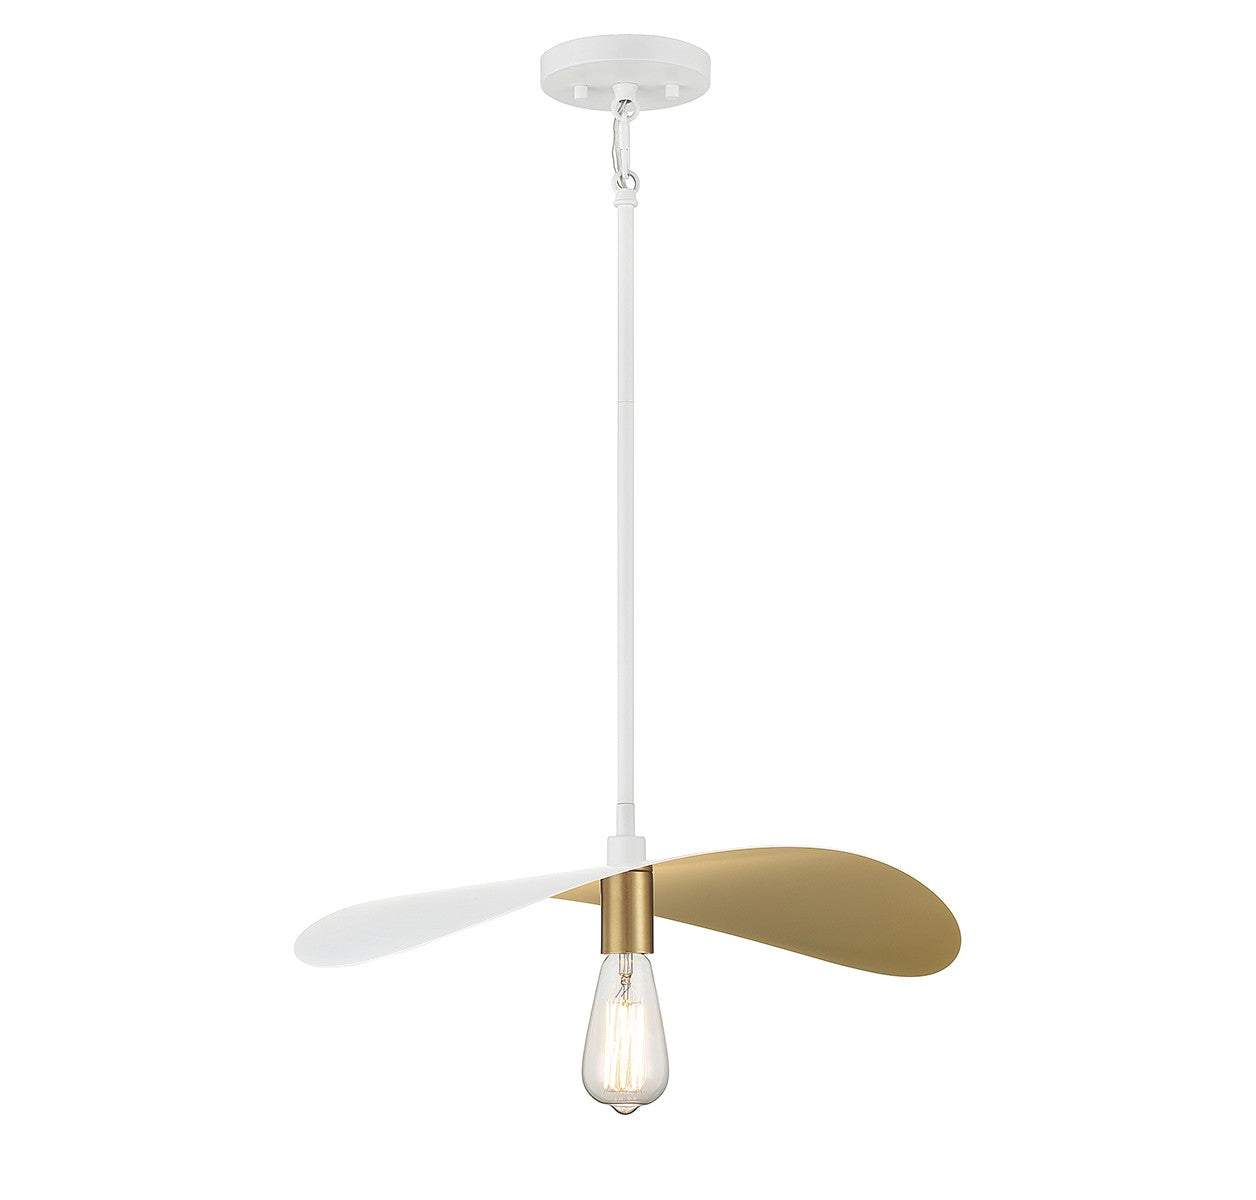 Meridian - One Light Pendant - White and Painted Gold- Union Lighting Luminaires Decor